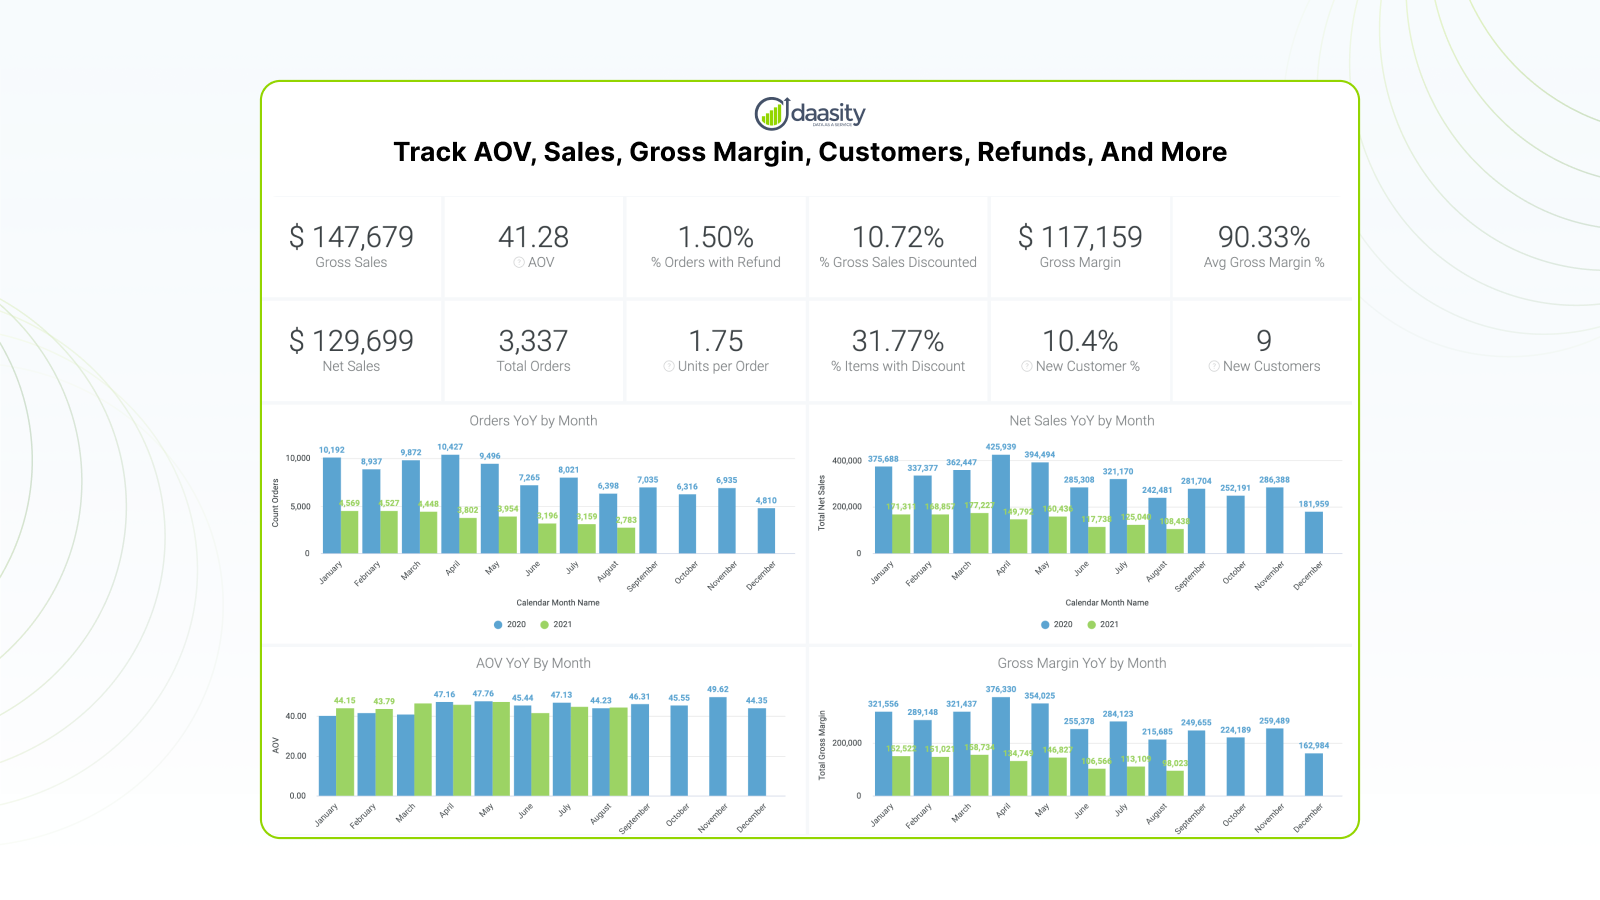 Track AOV, sales, gross margin, customers, refunds, and more